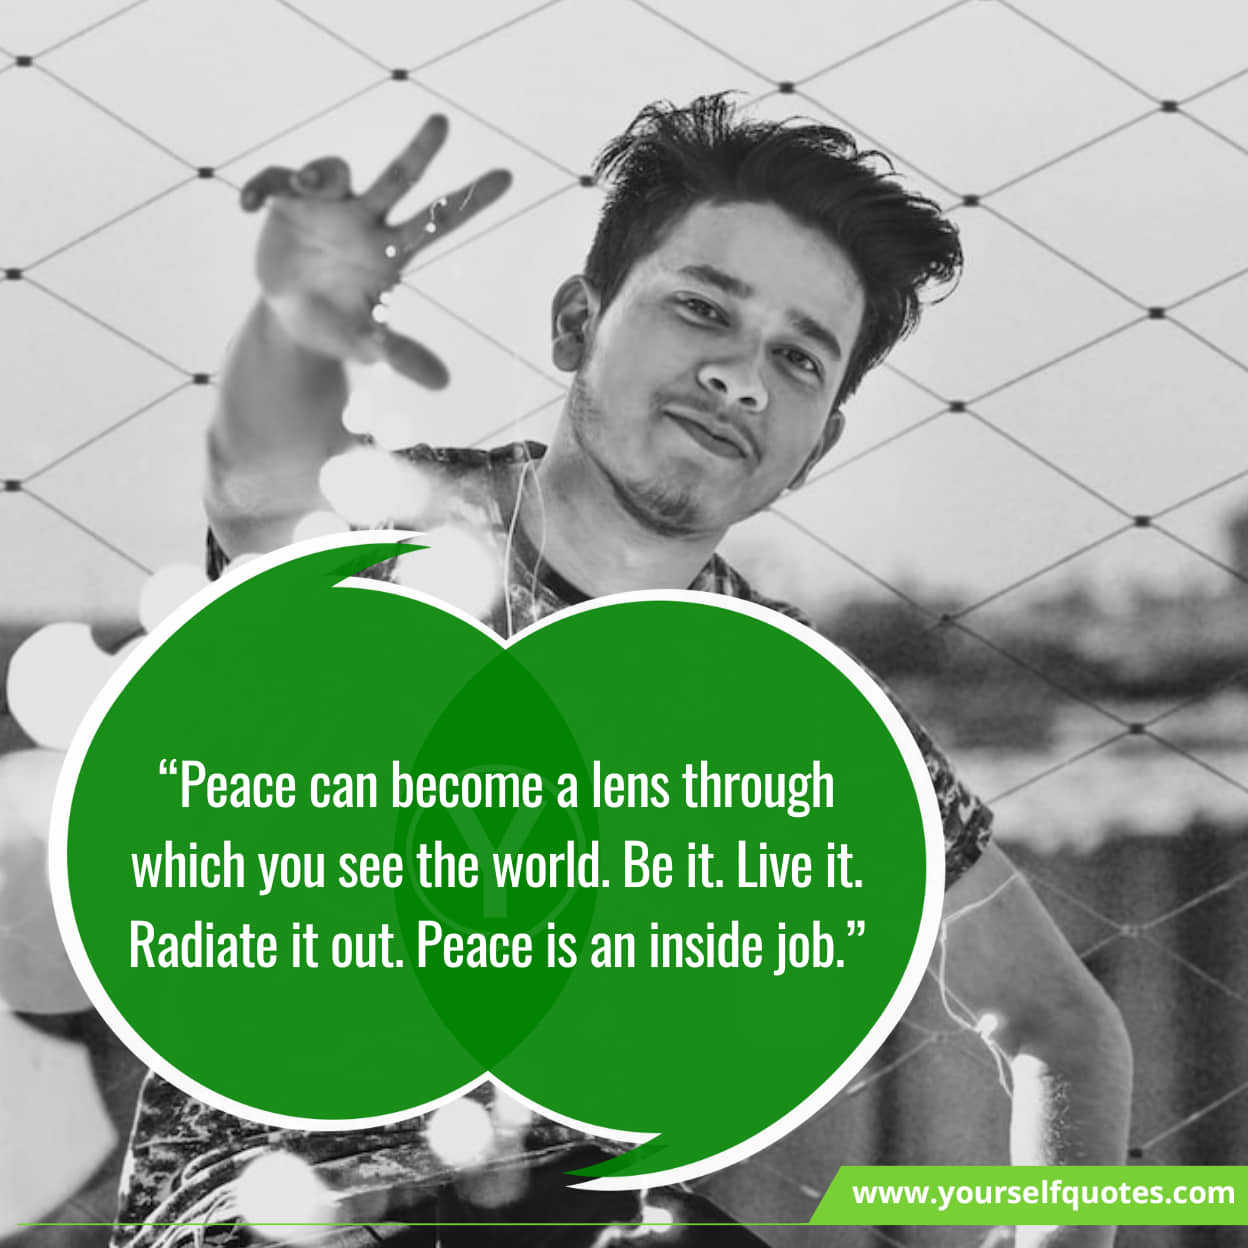 Motivational Peace Quotes For Life